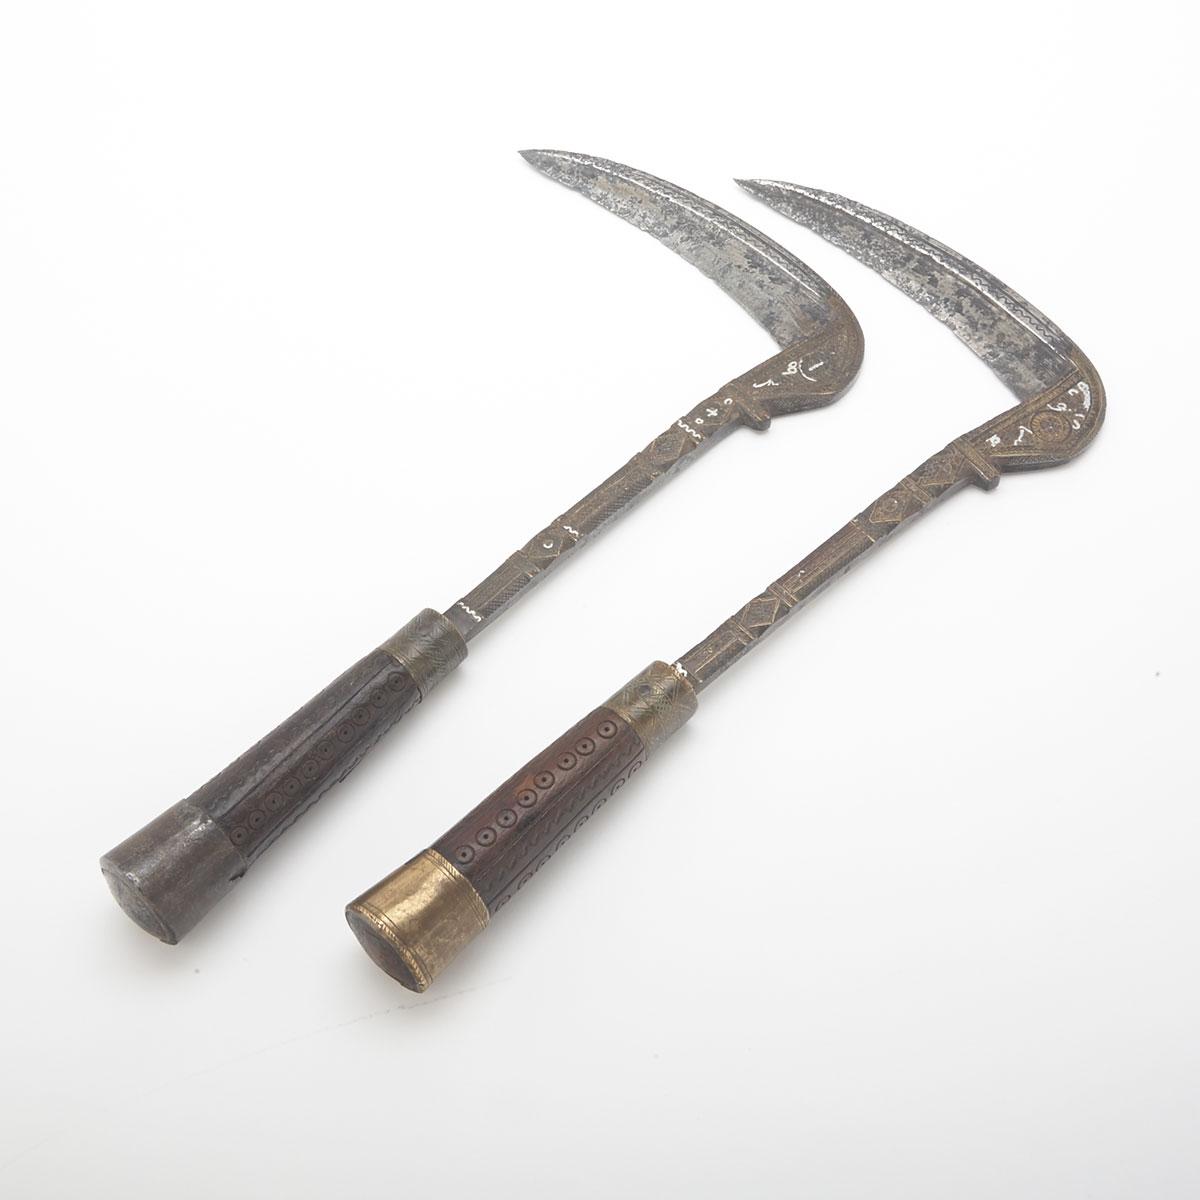 Two Afghanistan Banochie Lohar Axes, Khayber Pass, 19th century